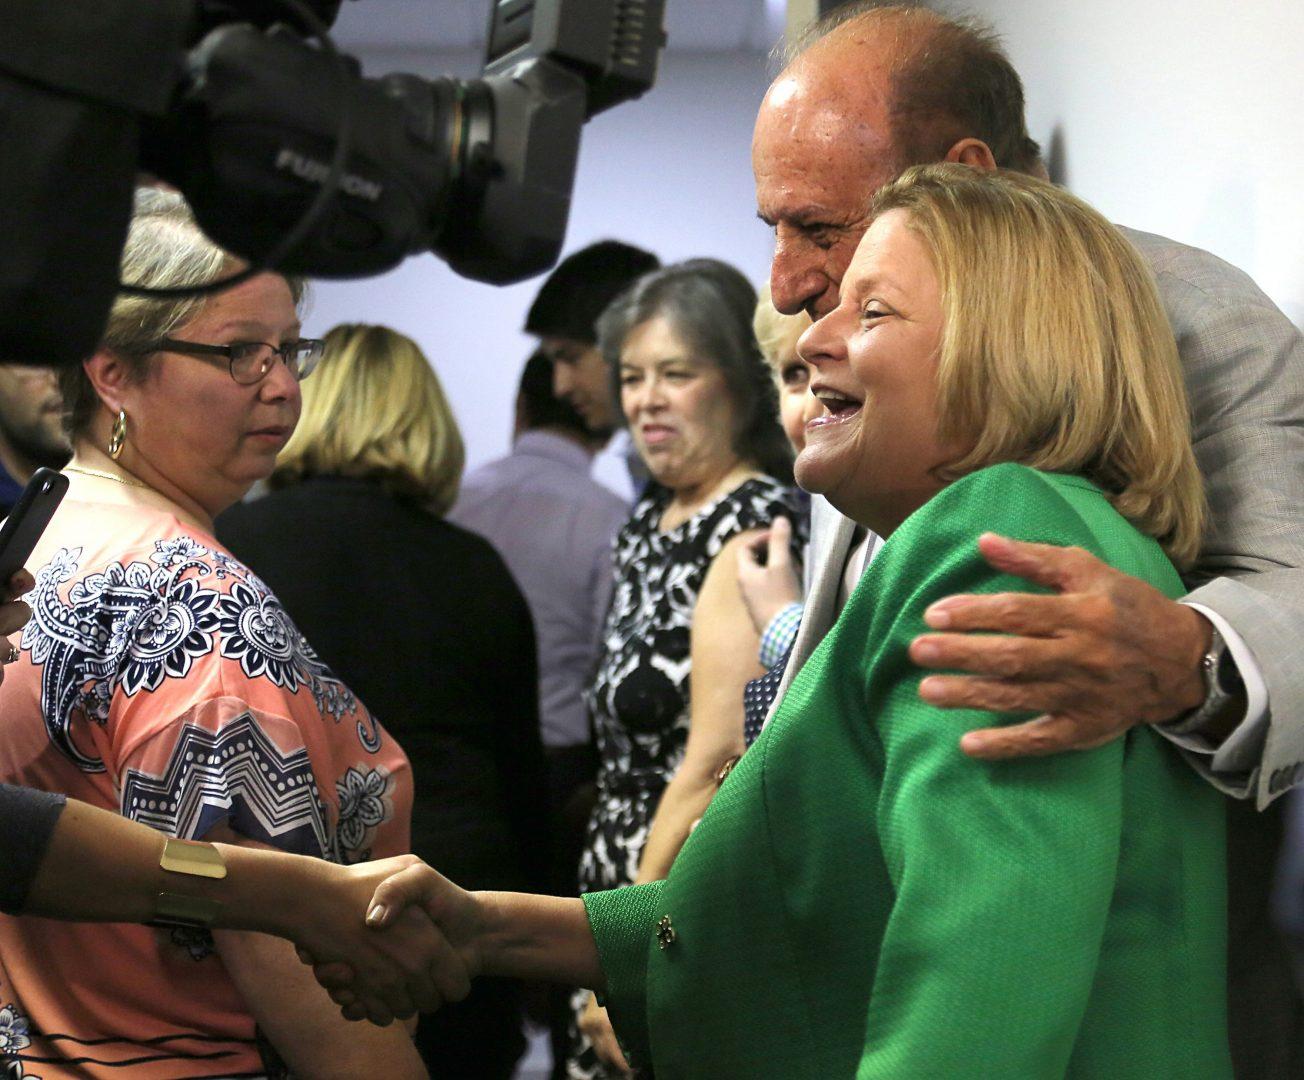 U.S. Rep. Ileana Ros-Lehtinen, right, shakes hands with well-wishers after giving a statement regarding her retirement from Congress on May 1, 2017, in Miami, Fla. (Carl Juste/Miami Herald/TNS)